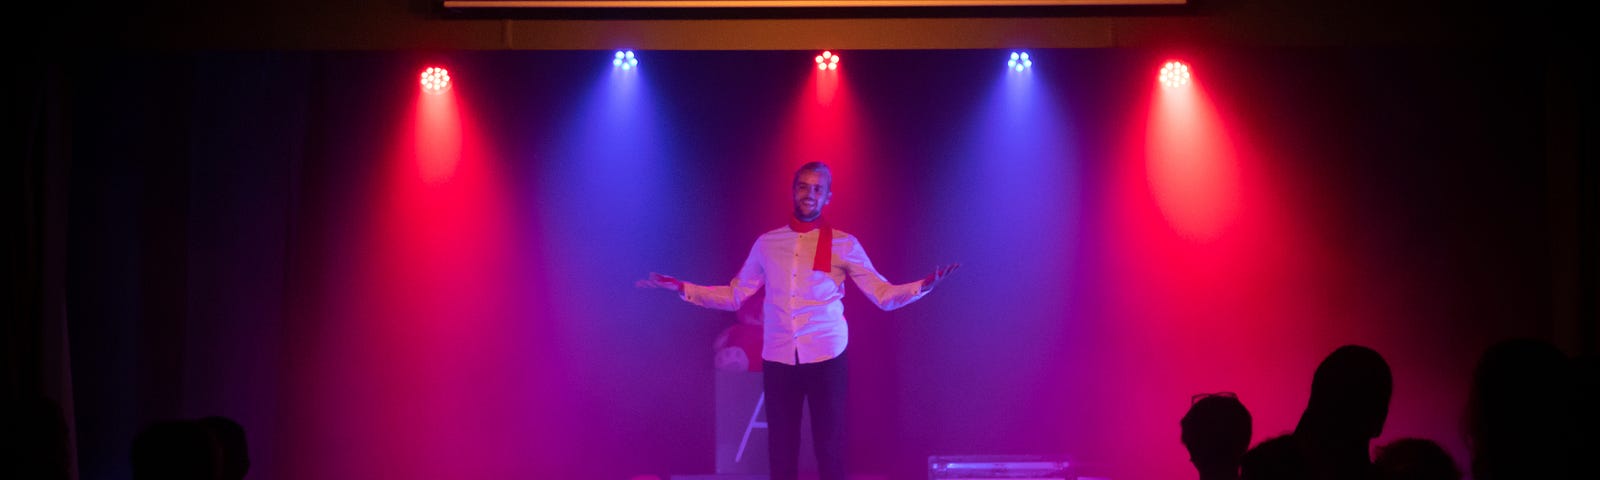 A white man with a beard wearing a white collared shirt, red scarf, and dark pants stands on a stage backlit by alternating blue and red lights in an otherwise dark room. He has his arms slightly outstretched. The dark silhouettes of a few people in the audience can be seen.